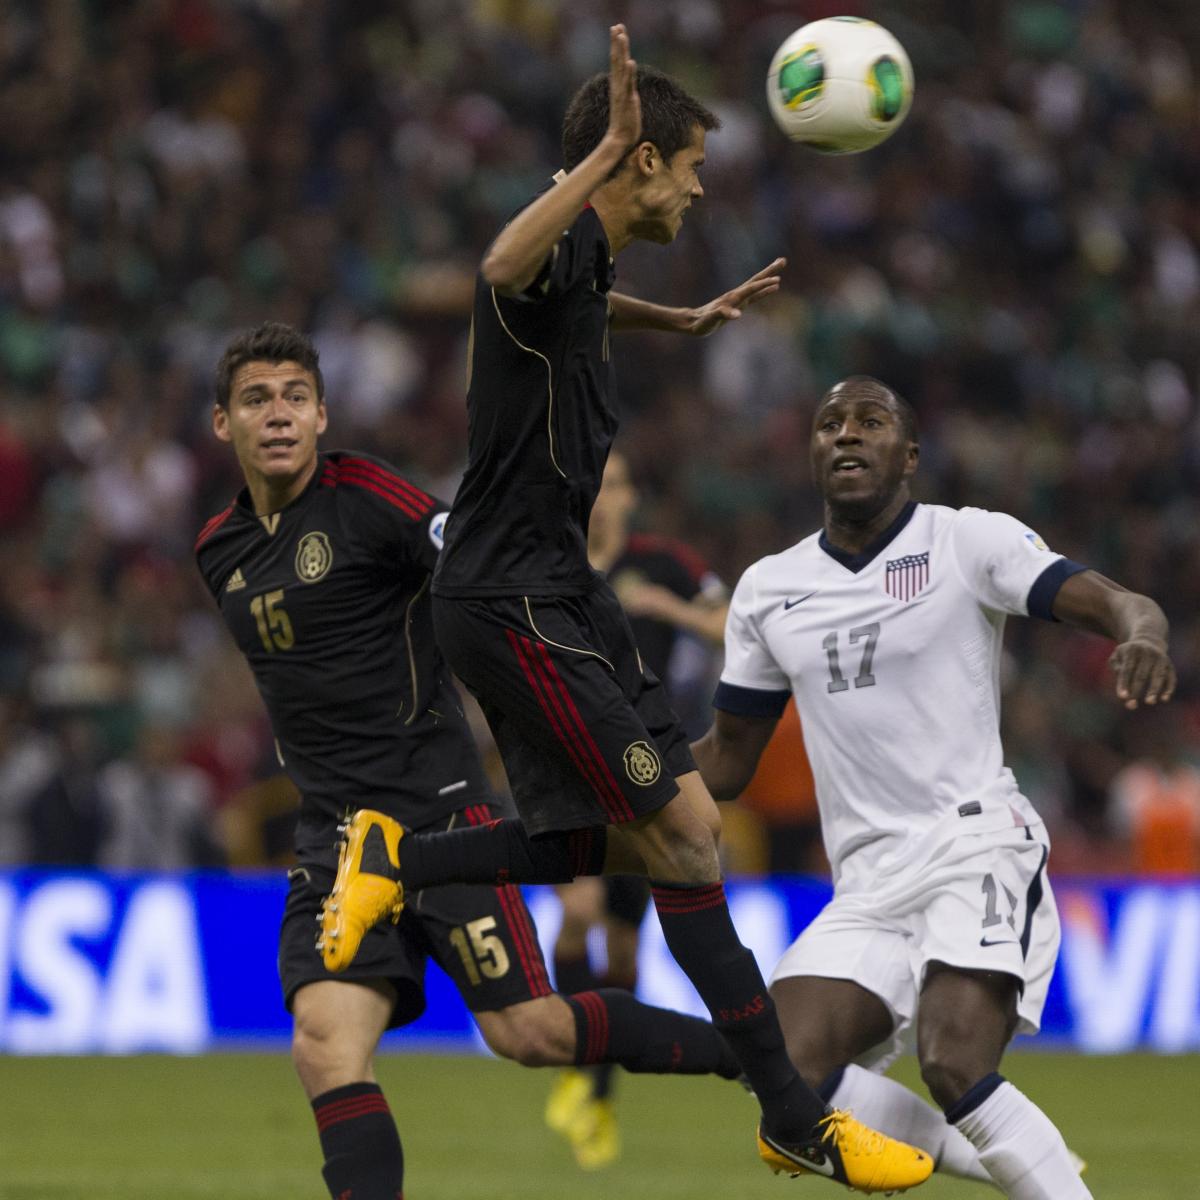 USA vs. Mexico: Viewing Info and Preview for Key World Cup Qualifier